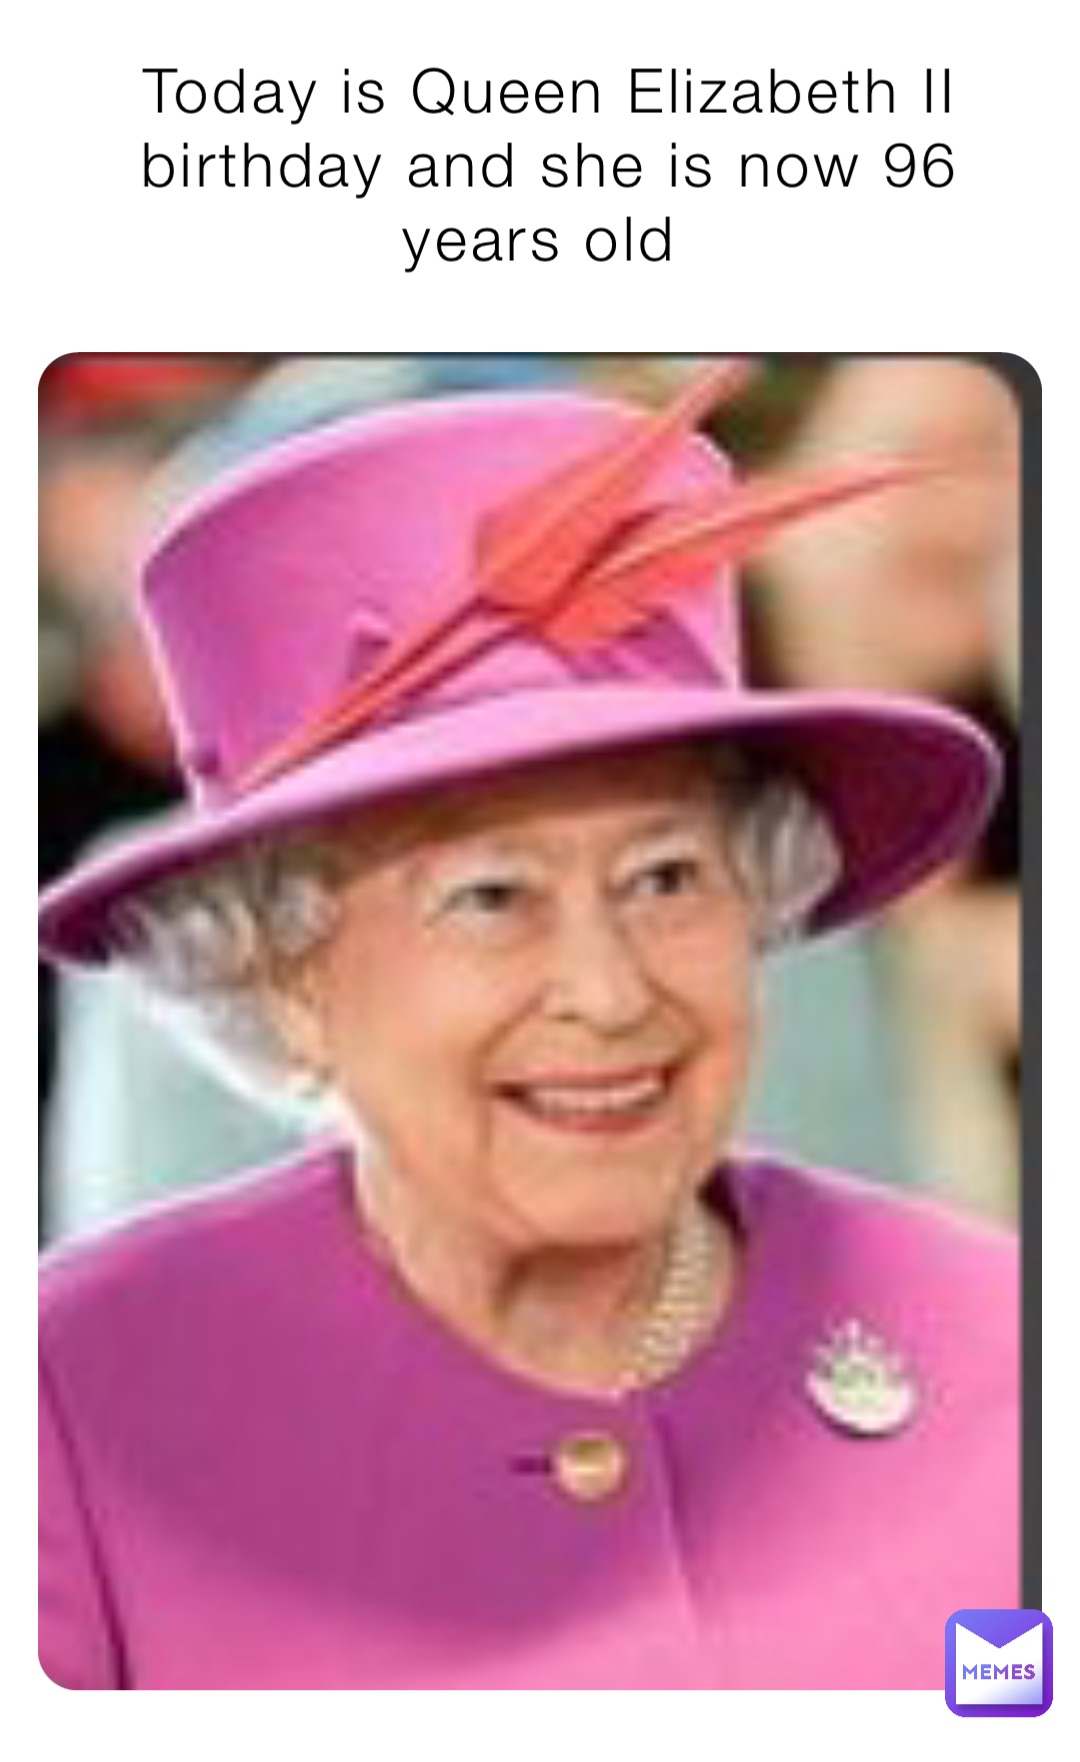 Today is Queen Elizabeth II birthday and she is now 96 years old